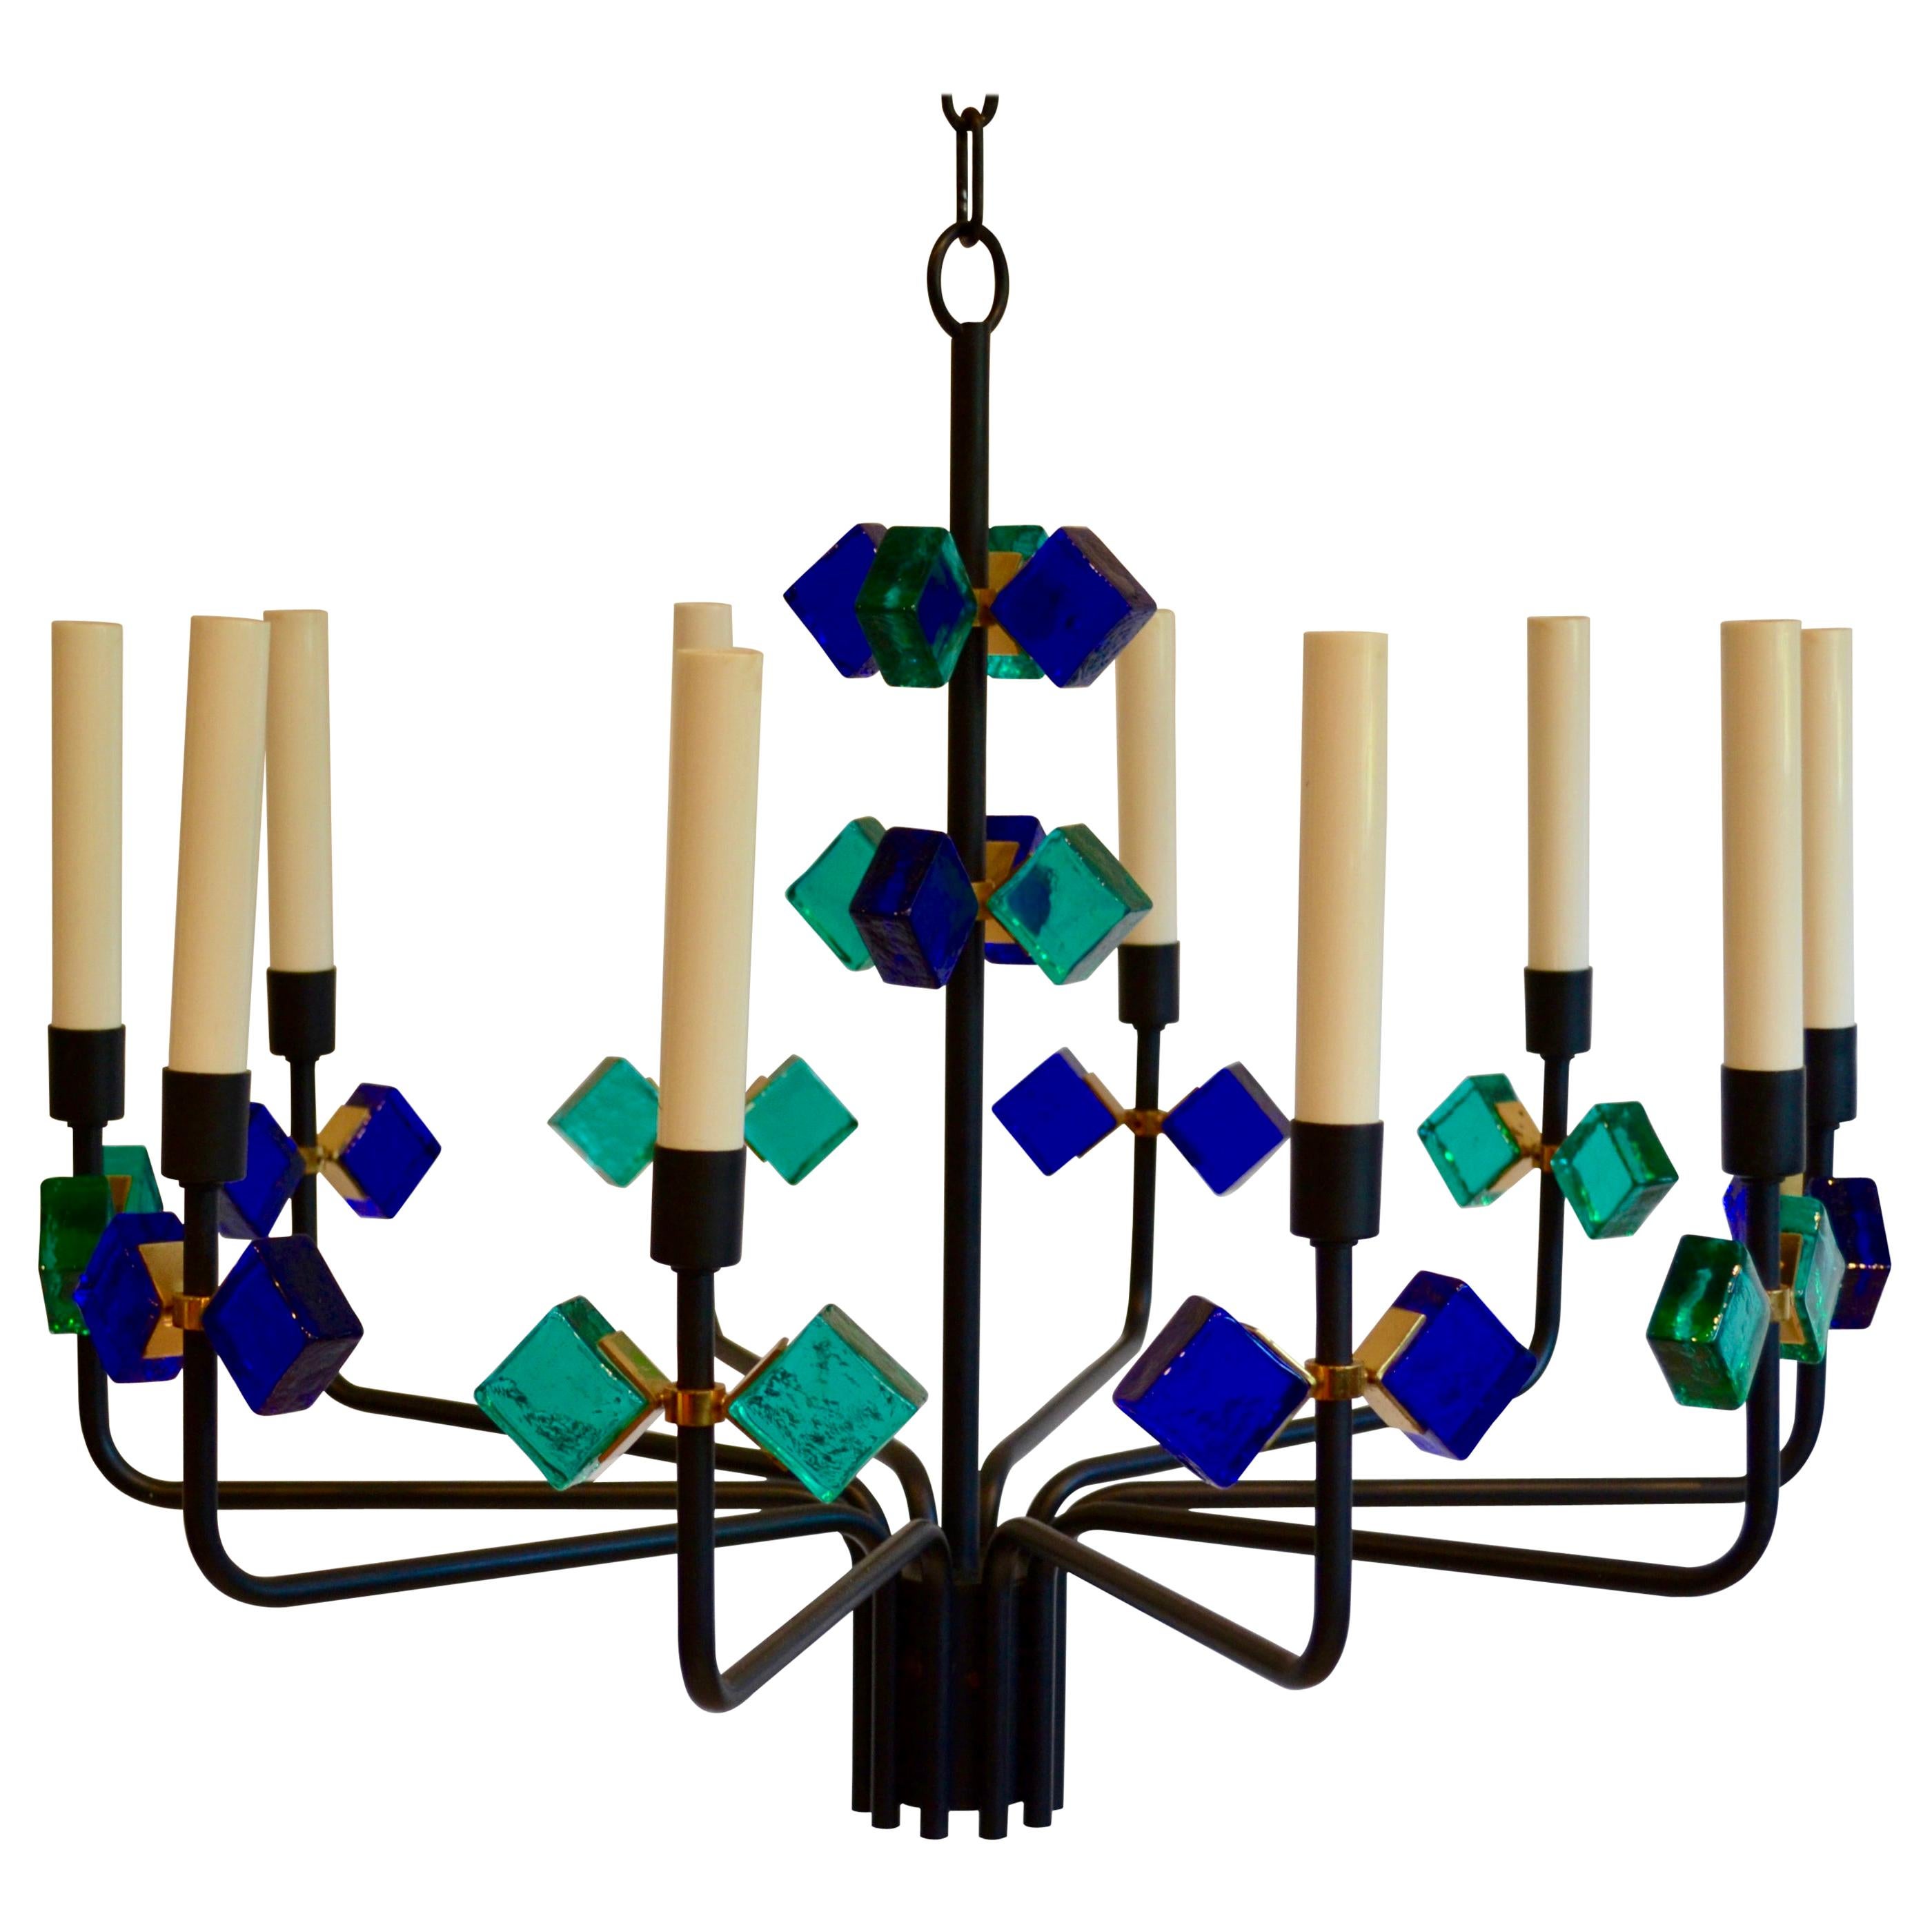 Blue Aqua Marine Glass and Iron Chandelier by Svend Aage Holm Sorensen, Denmark For Sale